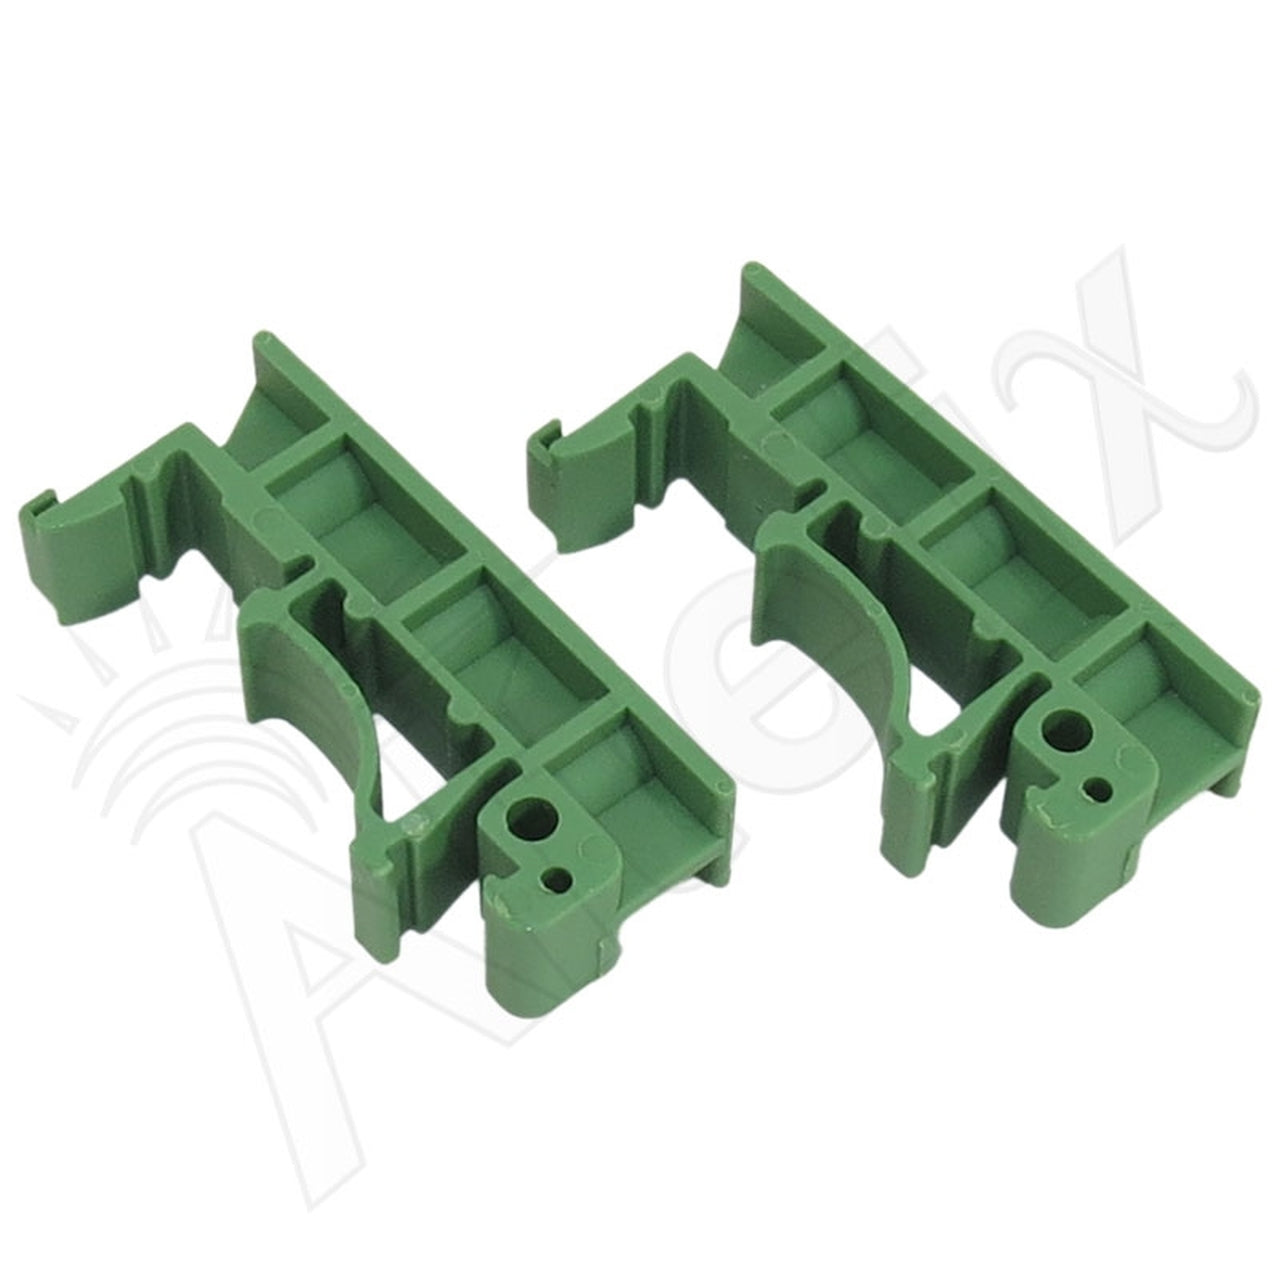 Plastic DIN Rail Mounting Clips 35mm Top Hat or 32mm G-Rail